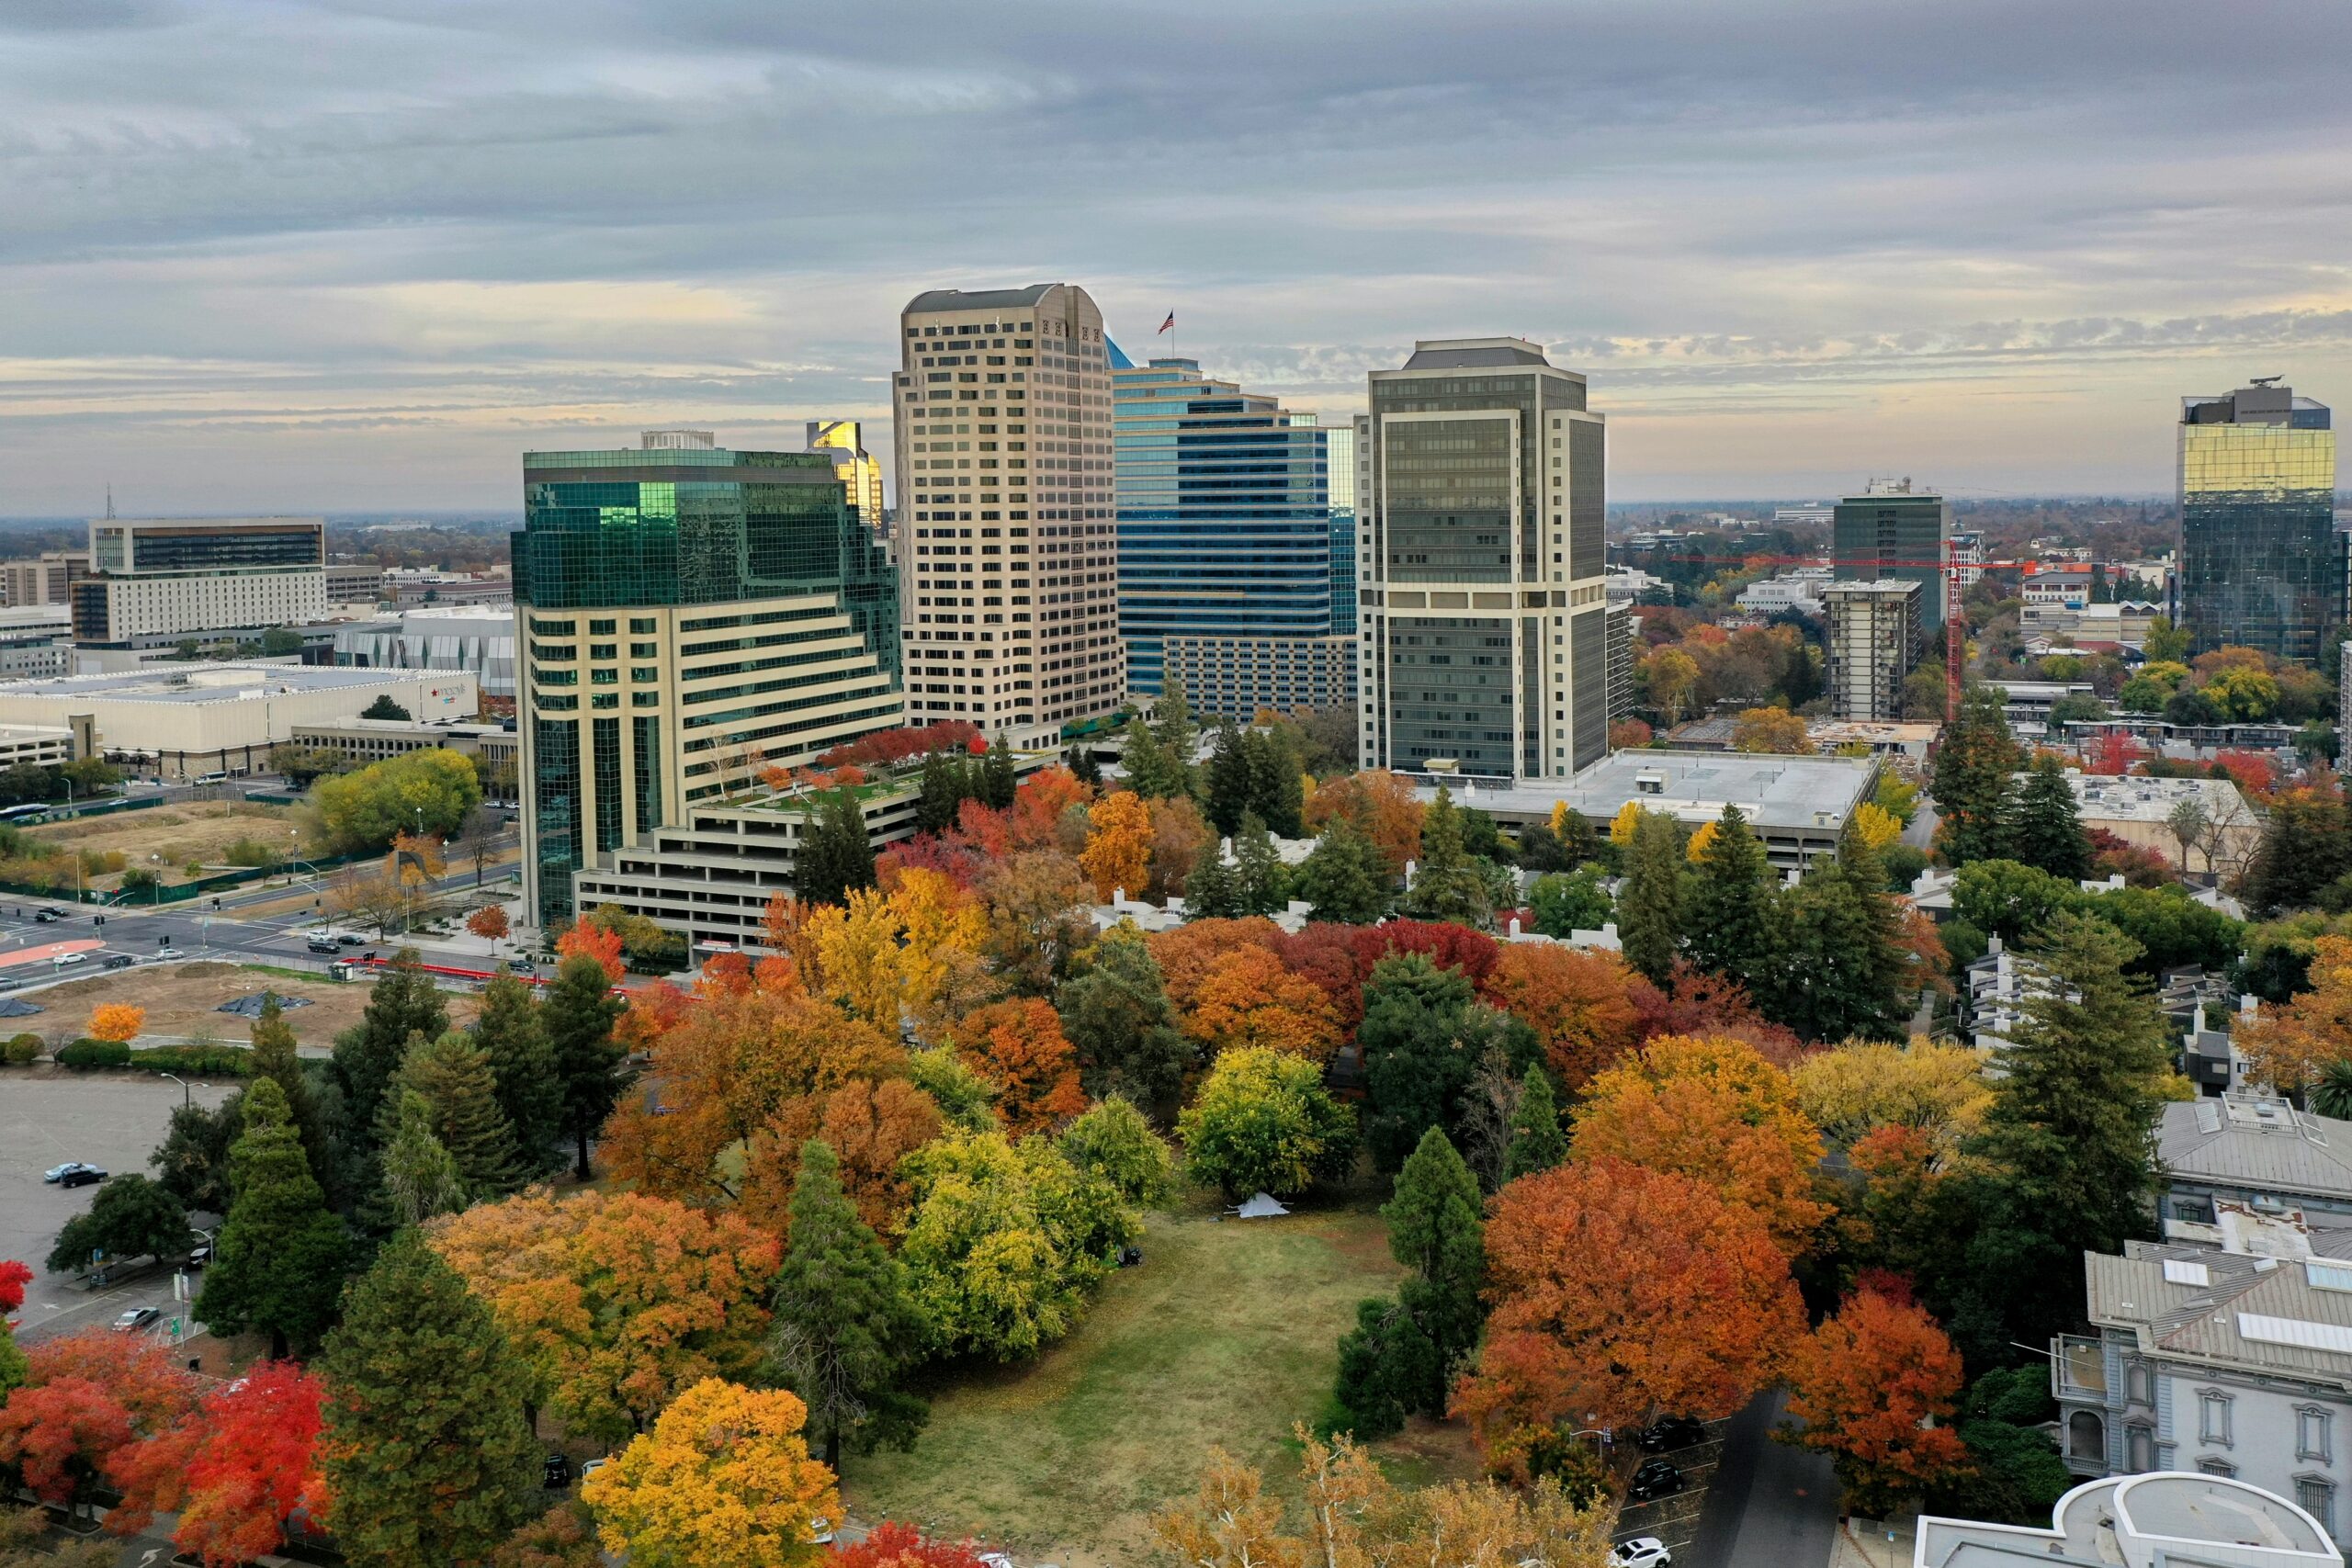 Sacramento is one of the best places to live in California for a lower cost of living. Pictured: A view of Sacramento